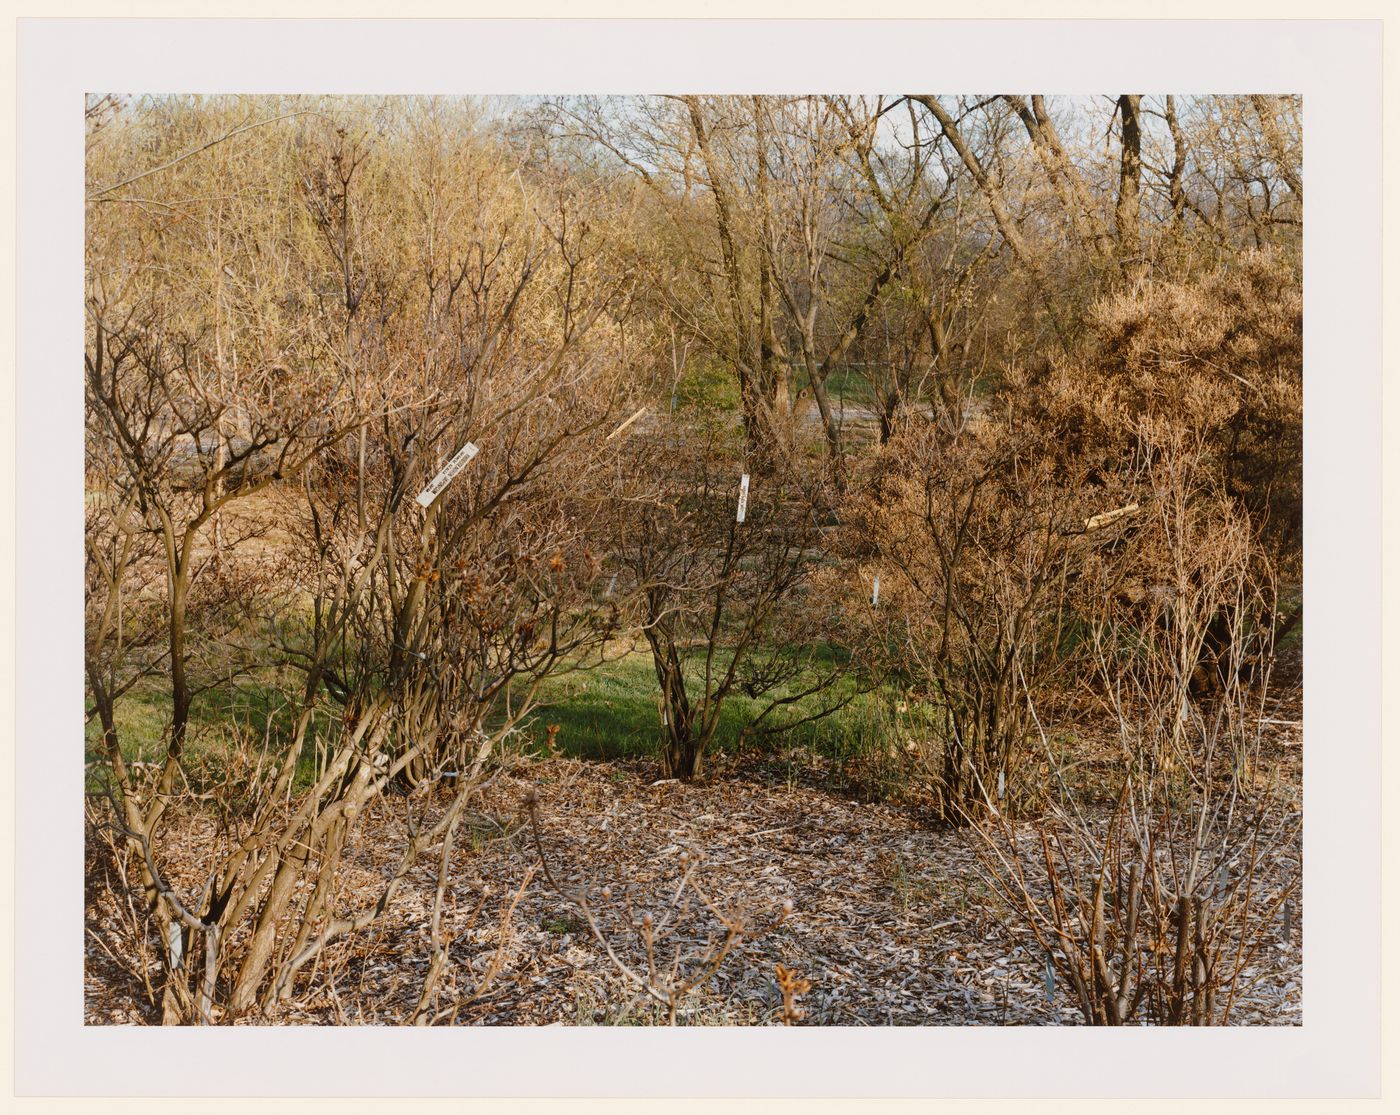 Viewing Olmsted: View of Shrubs, The Arnold Arboretum, Boston, Massachusetts